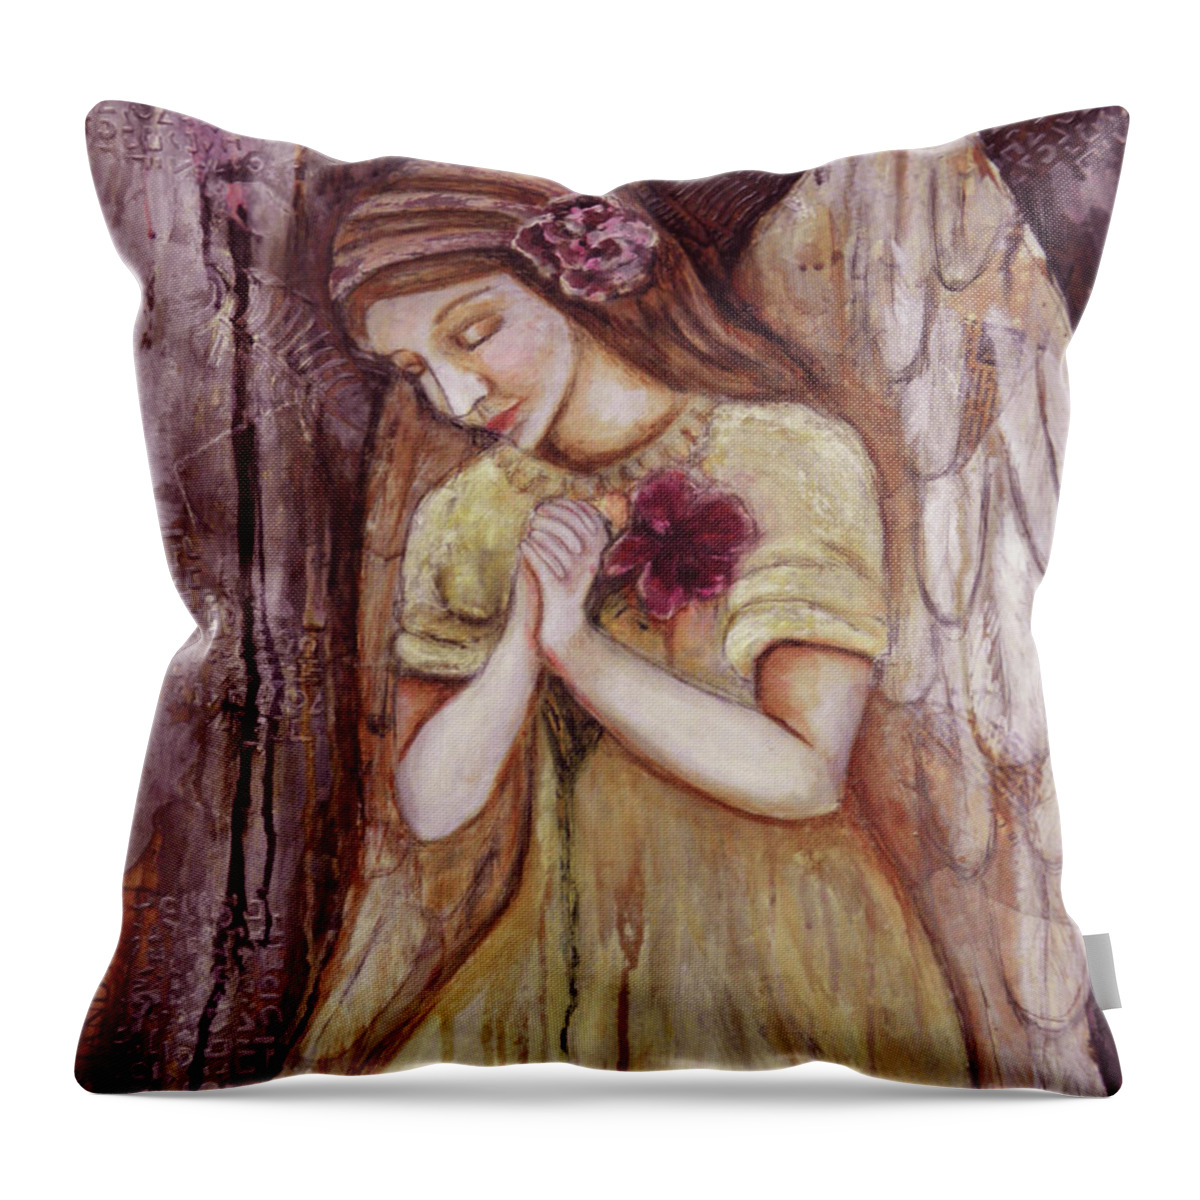 Angel Throw Pillow featuring the painting Prayer For All by Terry Honstead